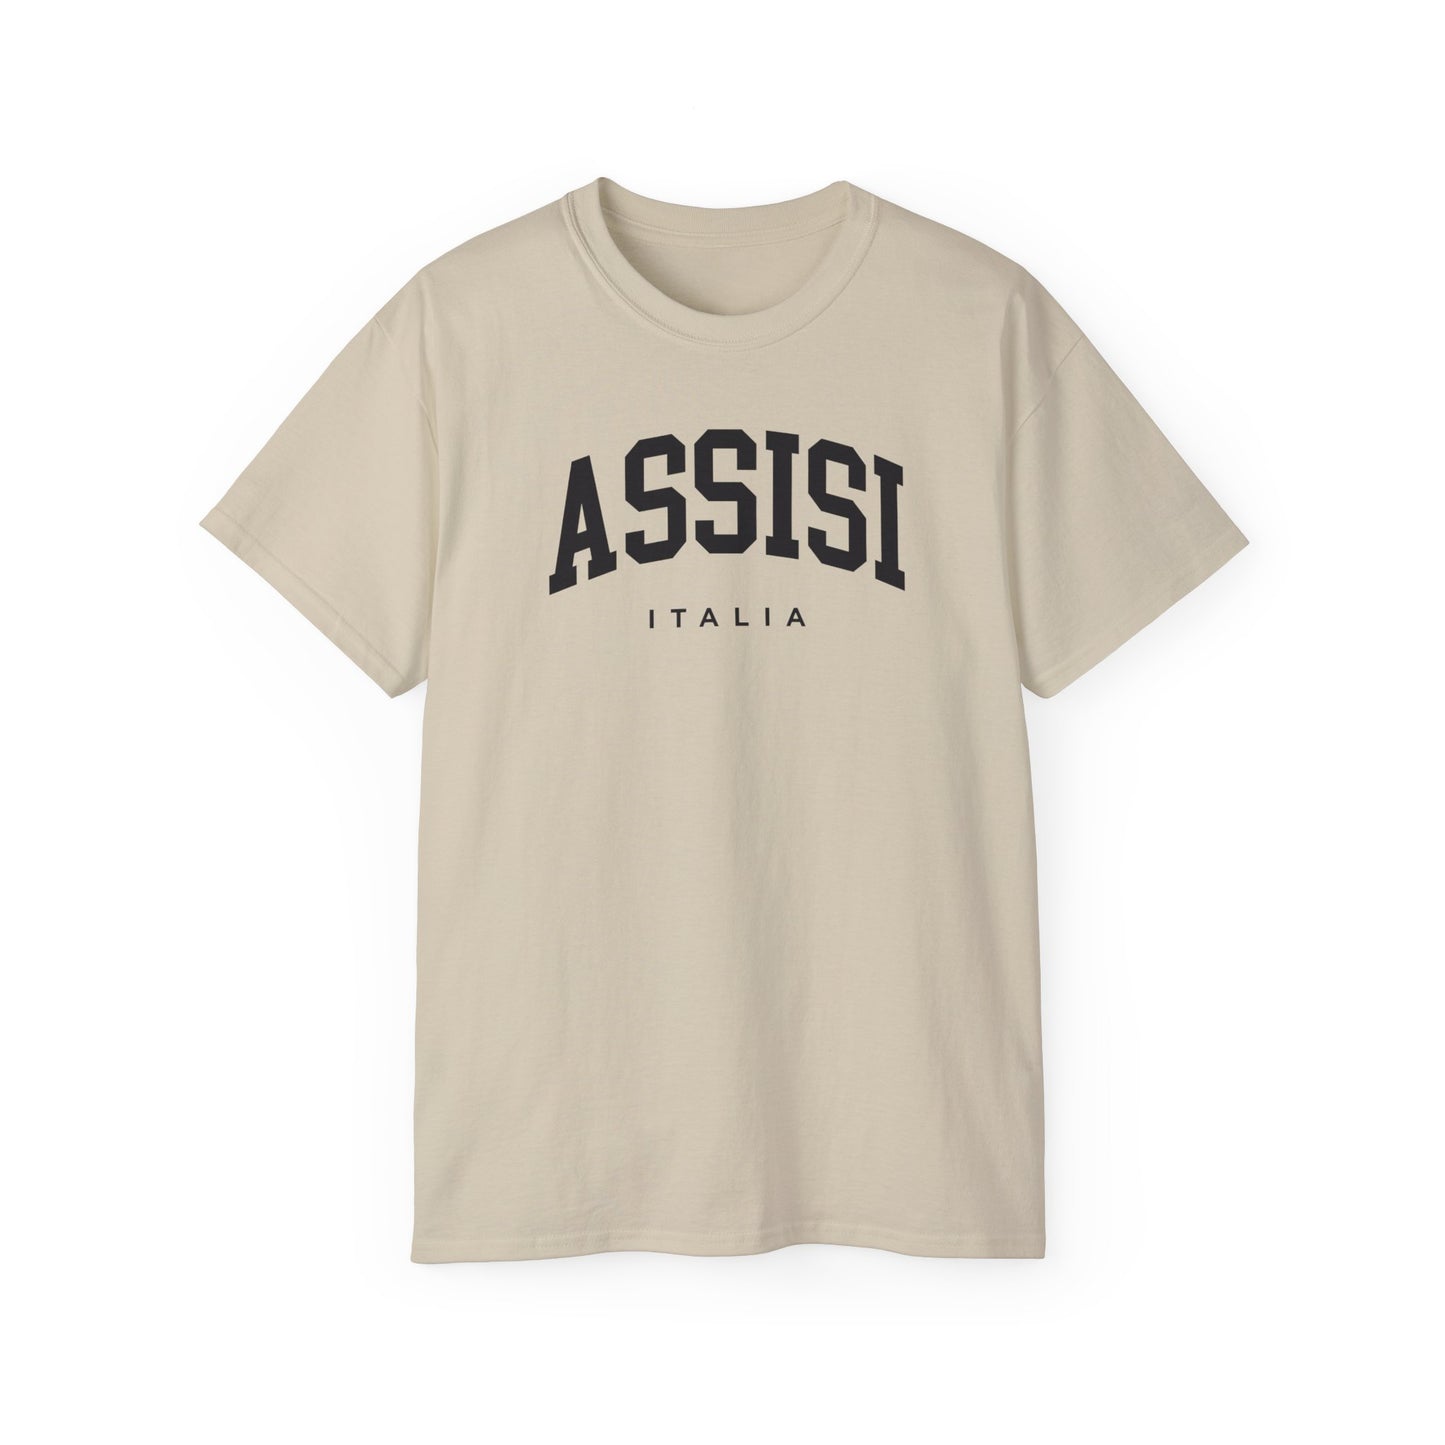 Assisi Italy Tee